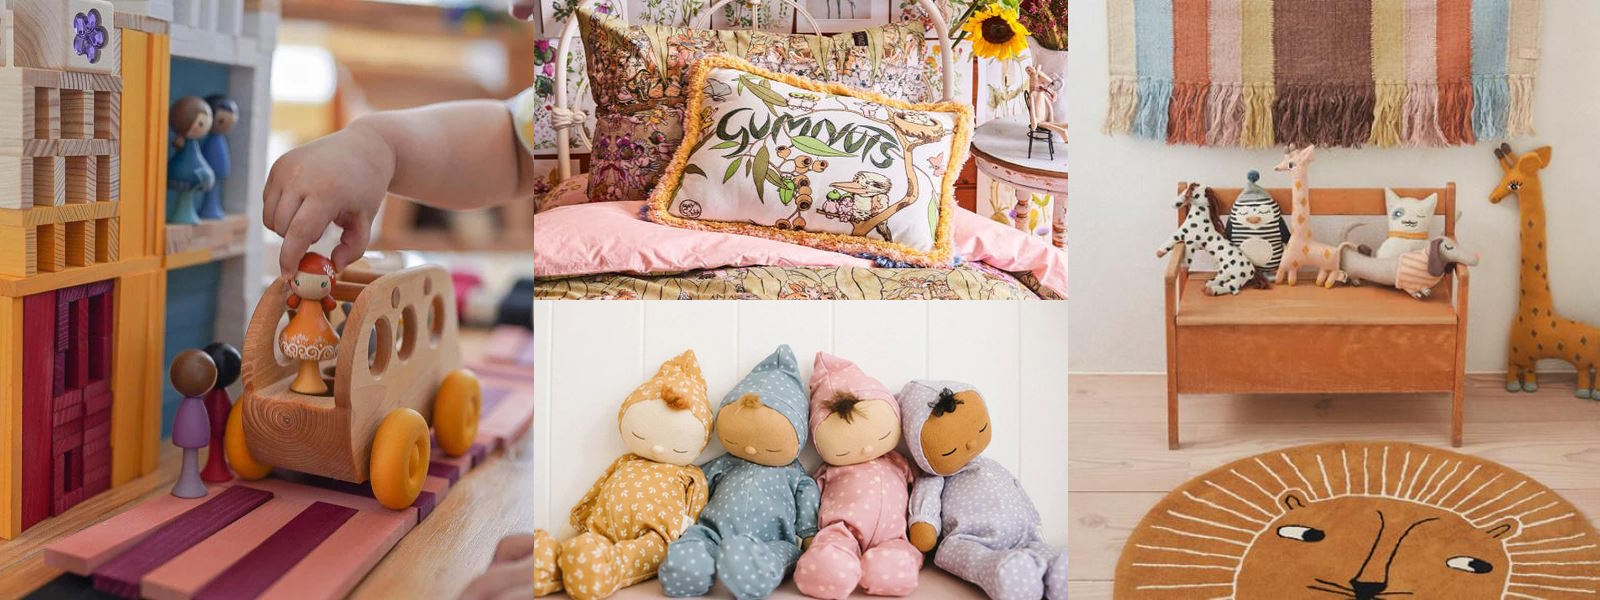 Use the code EOFY to take a further 15% off clearance toys bedding dolls wooden blocks and more at Milk Tooth Australia